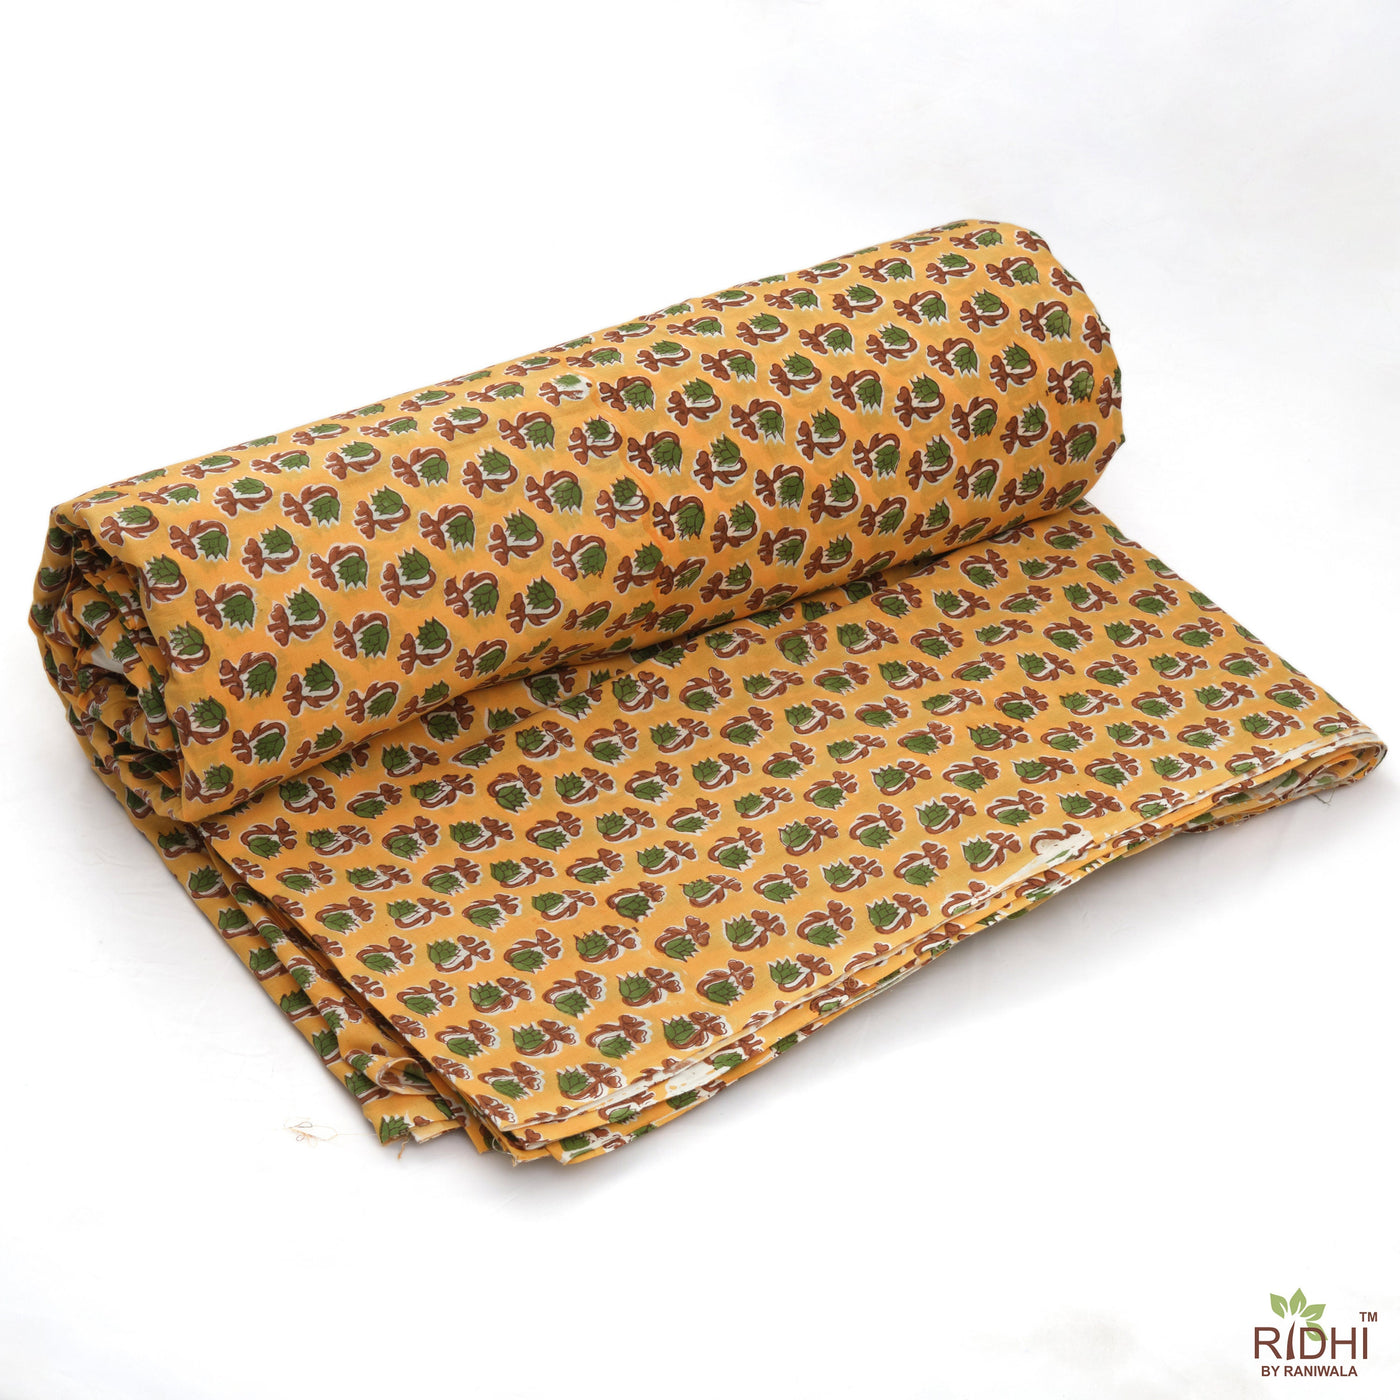 Yellow, Olive Green, Brown Indian Floral Hand Block Printed 100% Pure Cotton Cloth, Fabric by the yard, Women's Clothing Curtains Pillow Bag